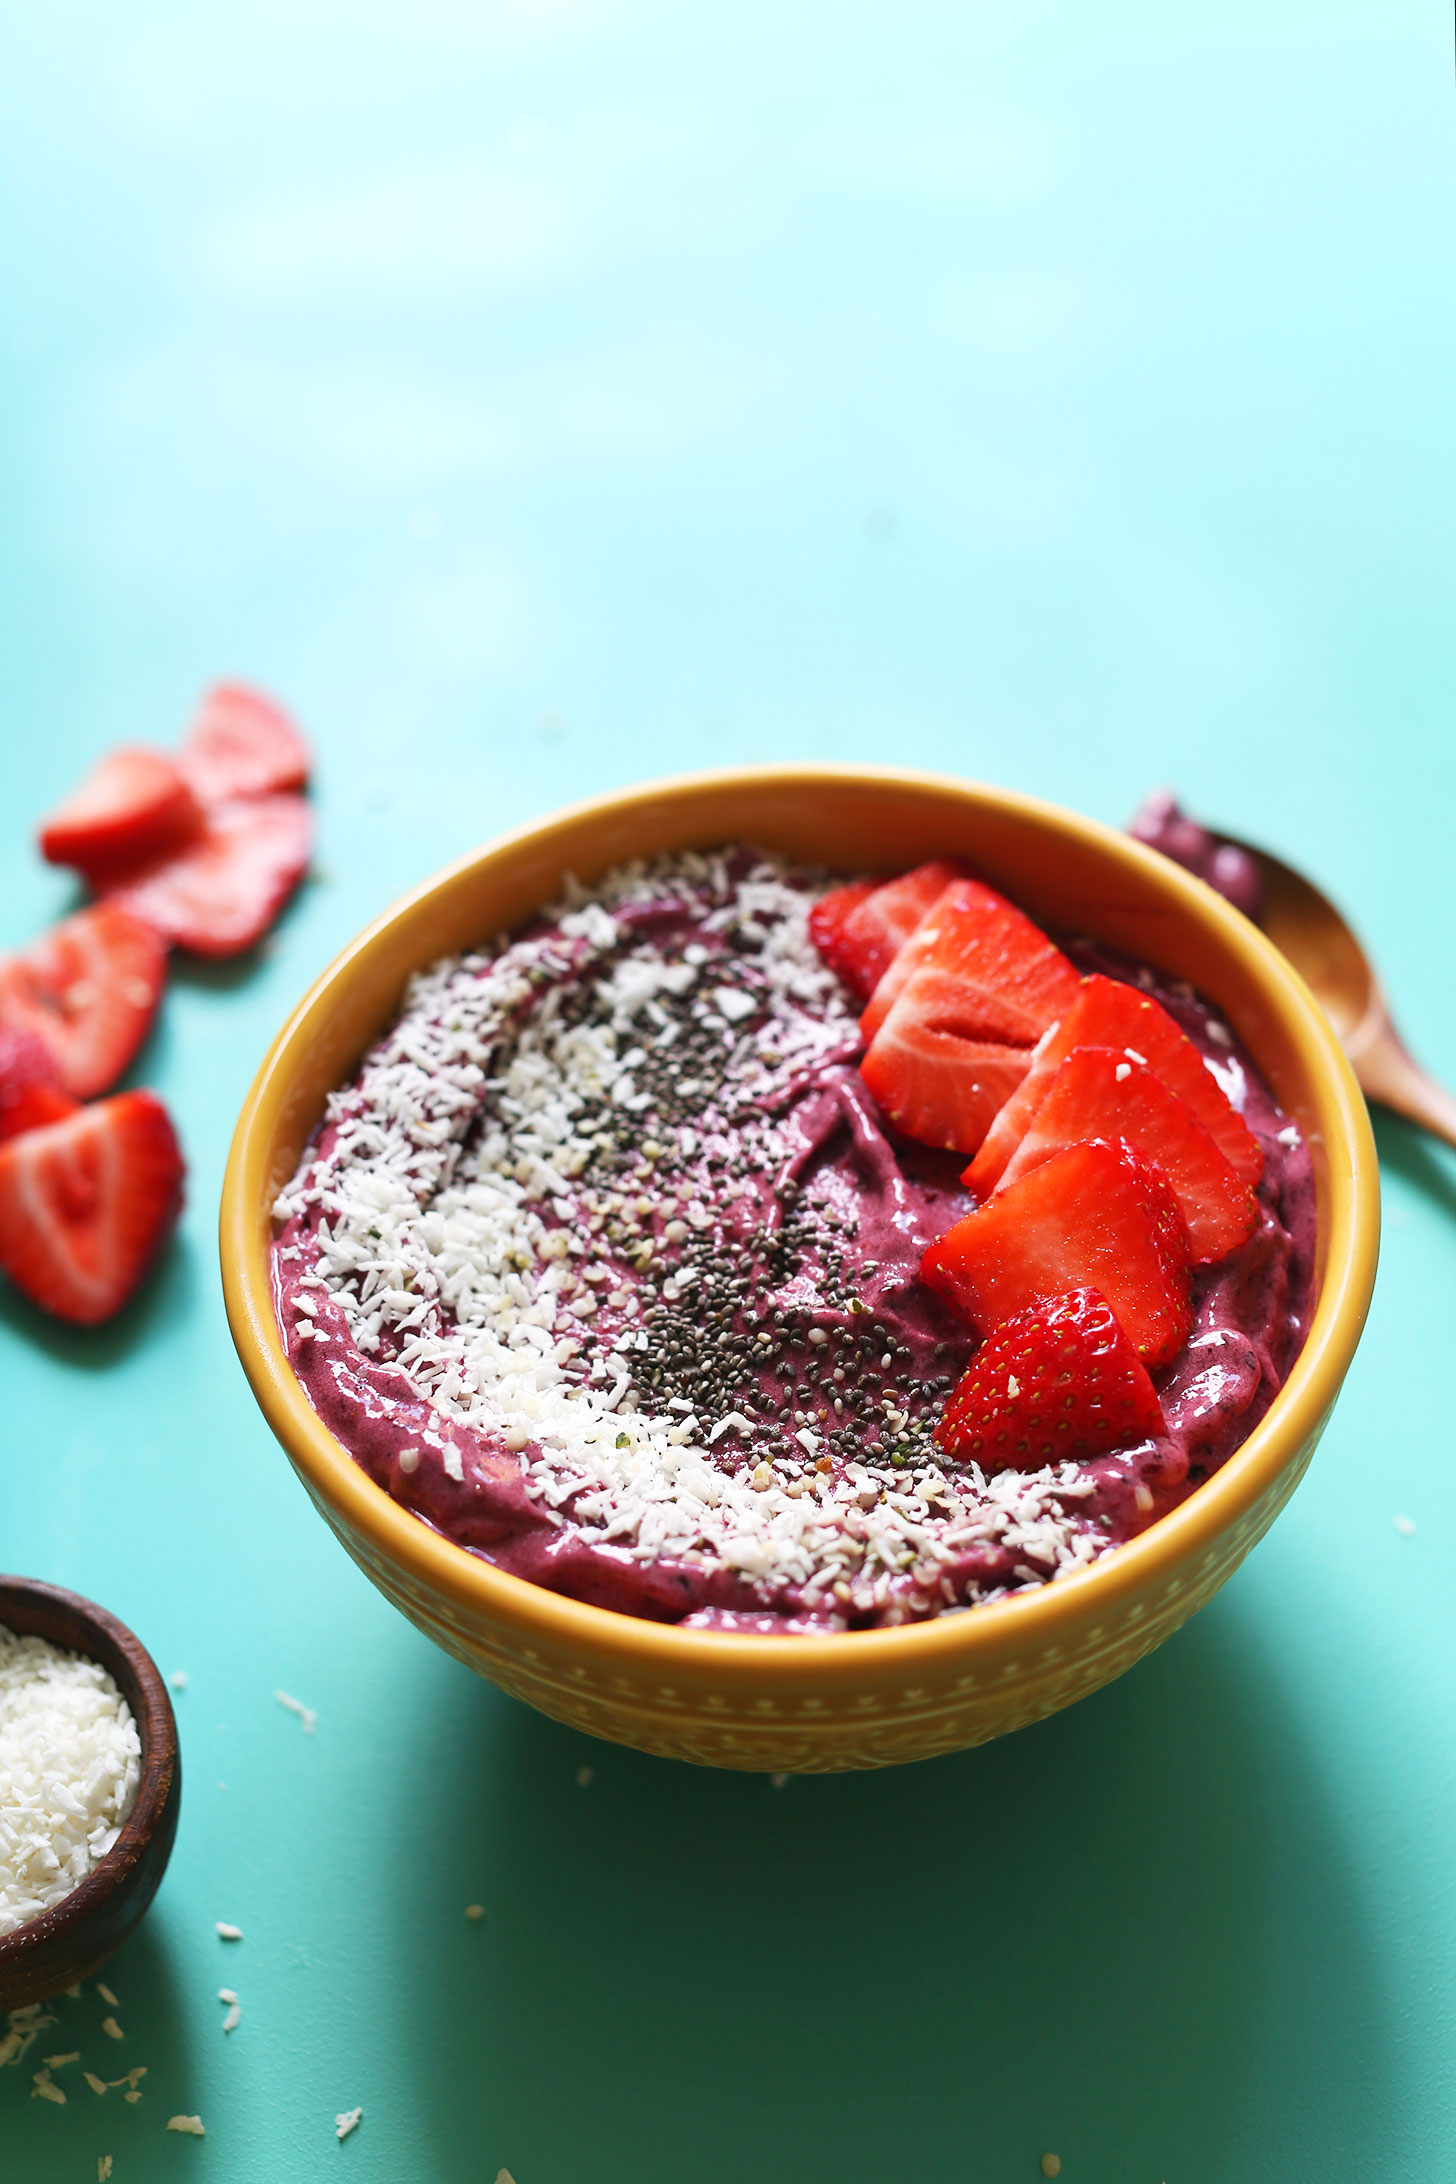 Our Perfect healthy Smoothie Bowl recipe made from simple ingredients